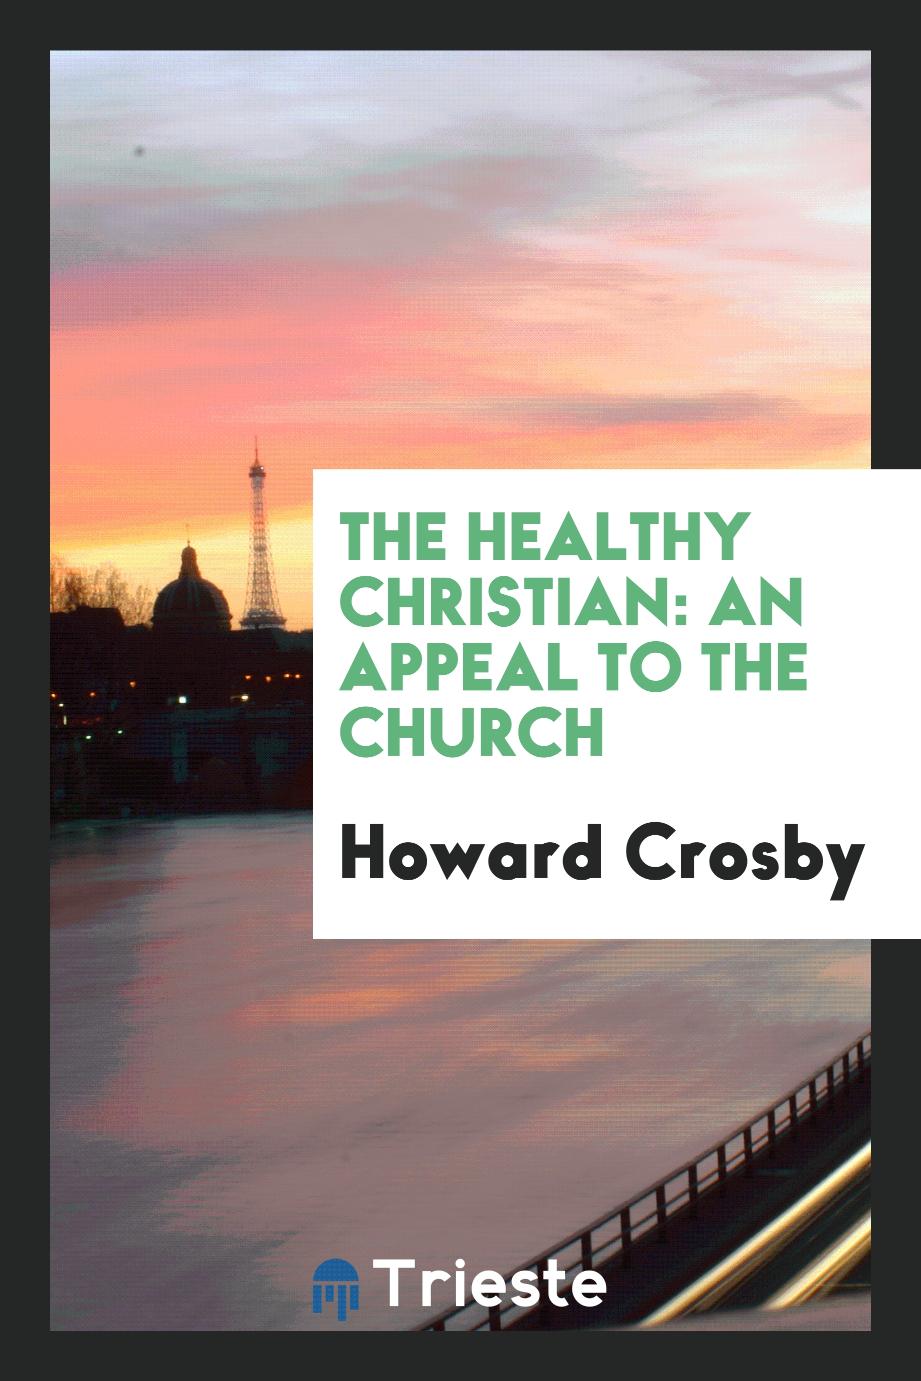 The Healthy Christian: An Appeal to the Church